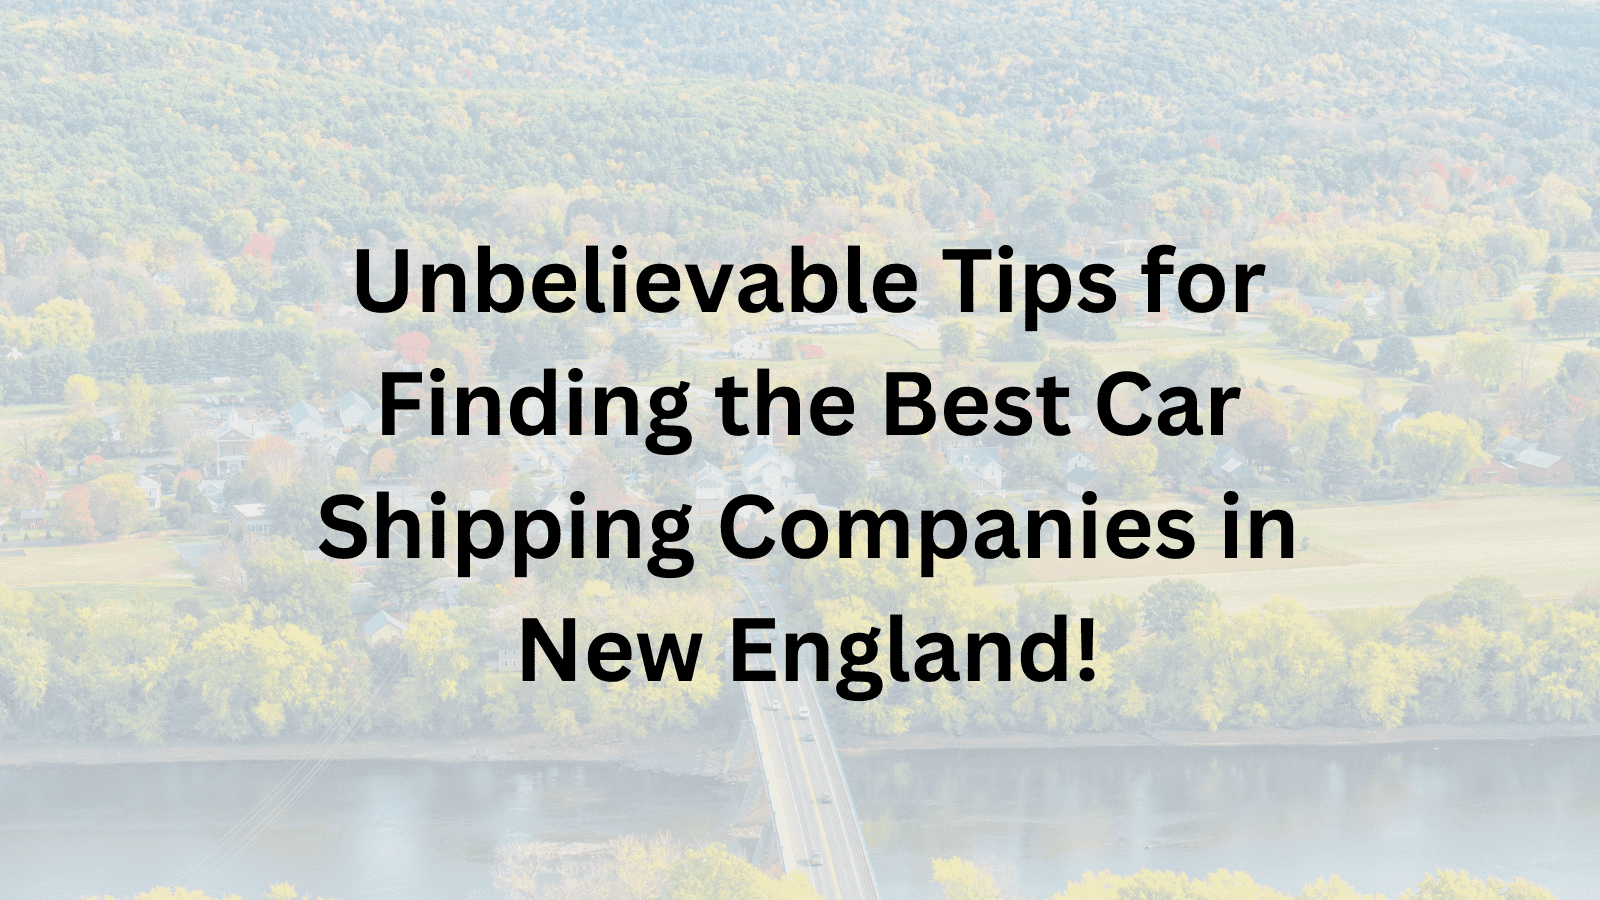 Unbelievable Tips for Finding the Best Car Shipping Companies in New England